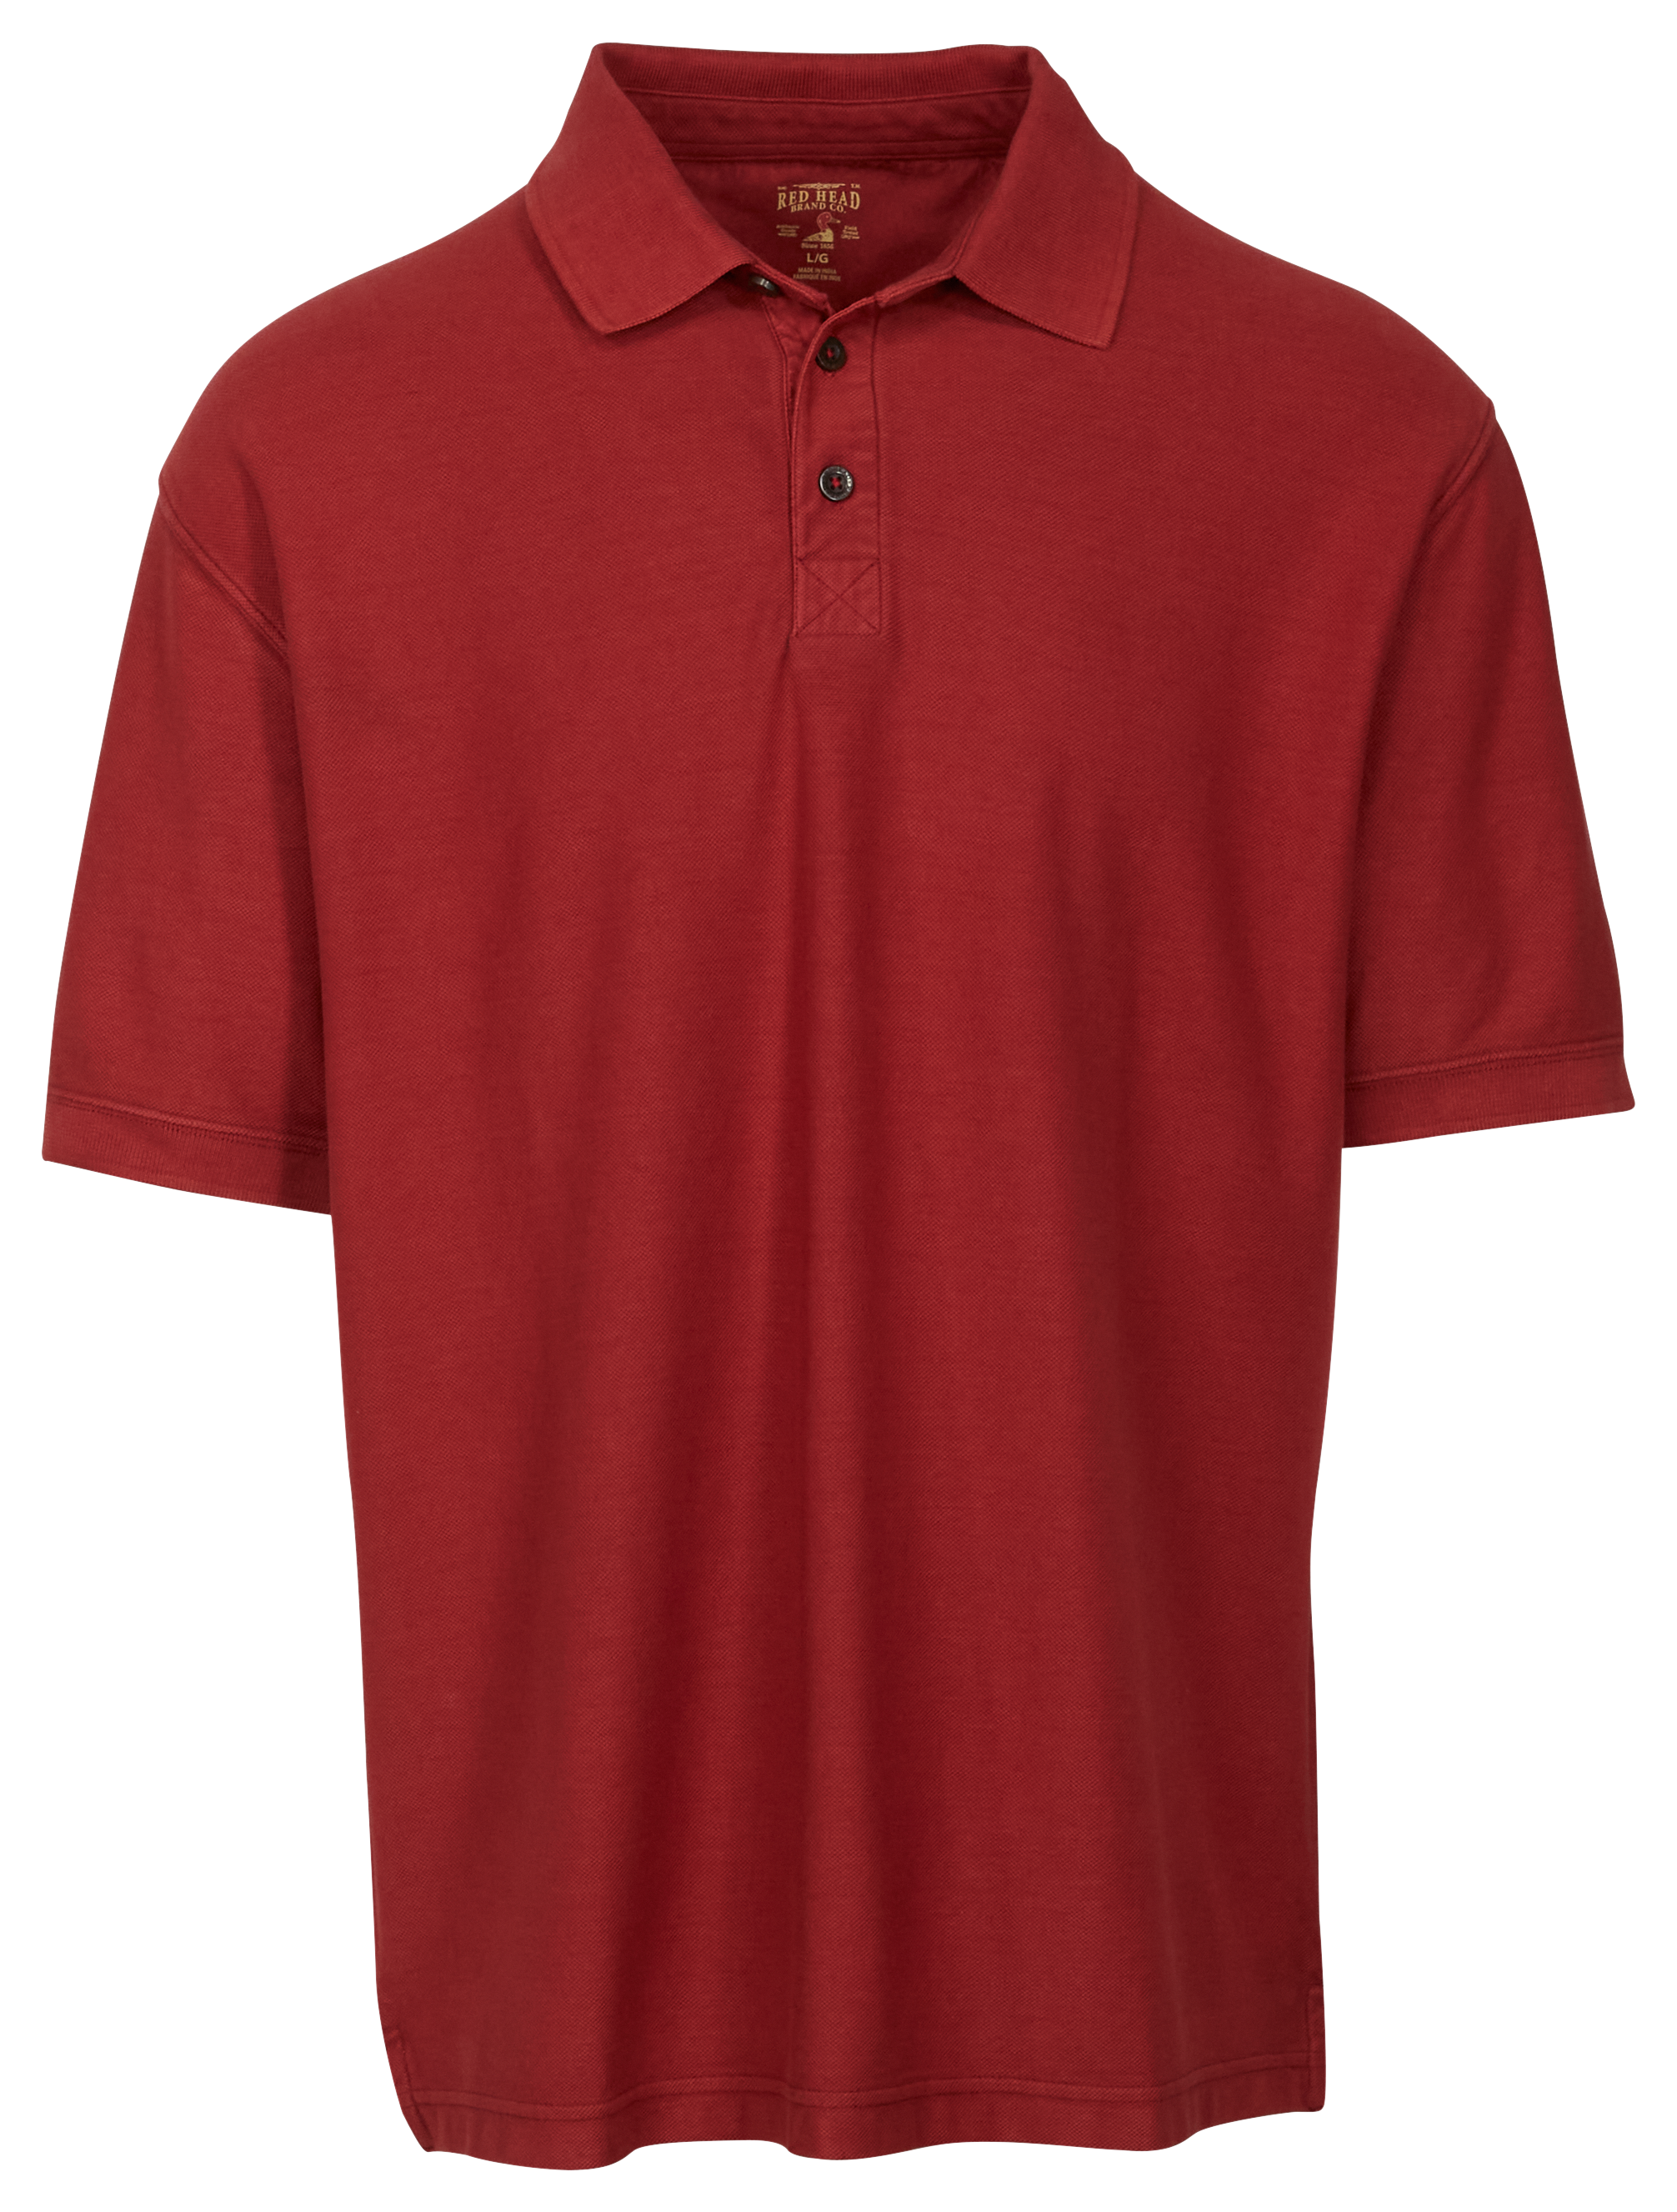 RedHead The Classic Polo Short-Sleeve Shirt for Men